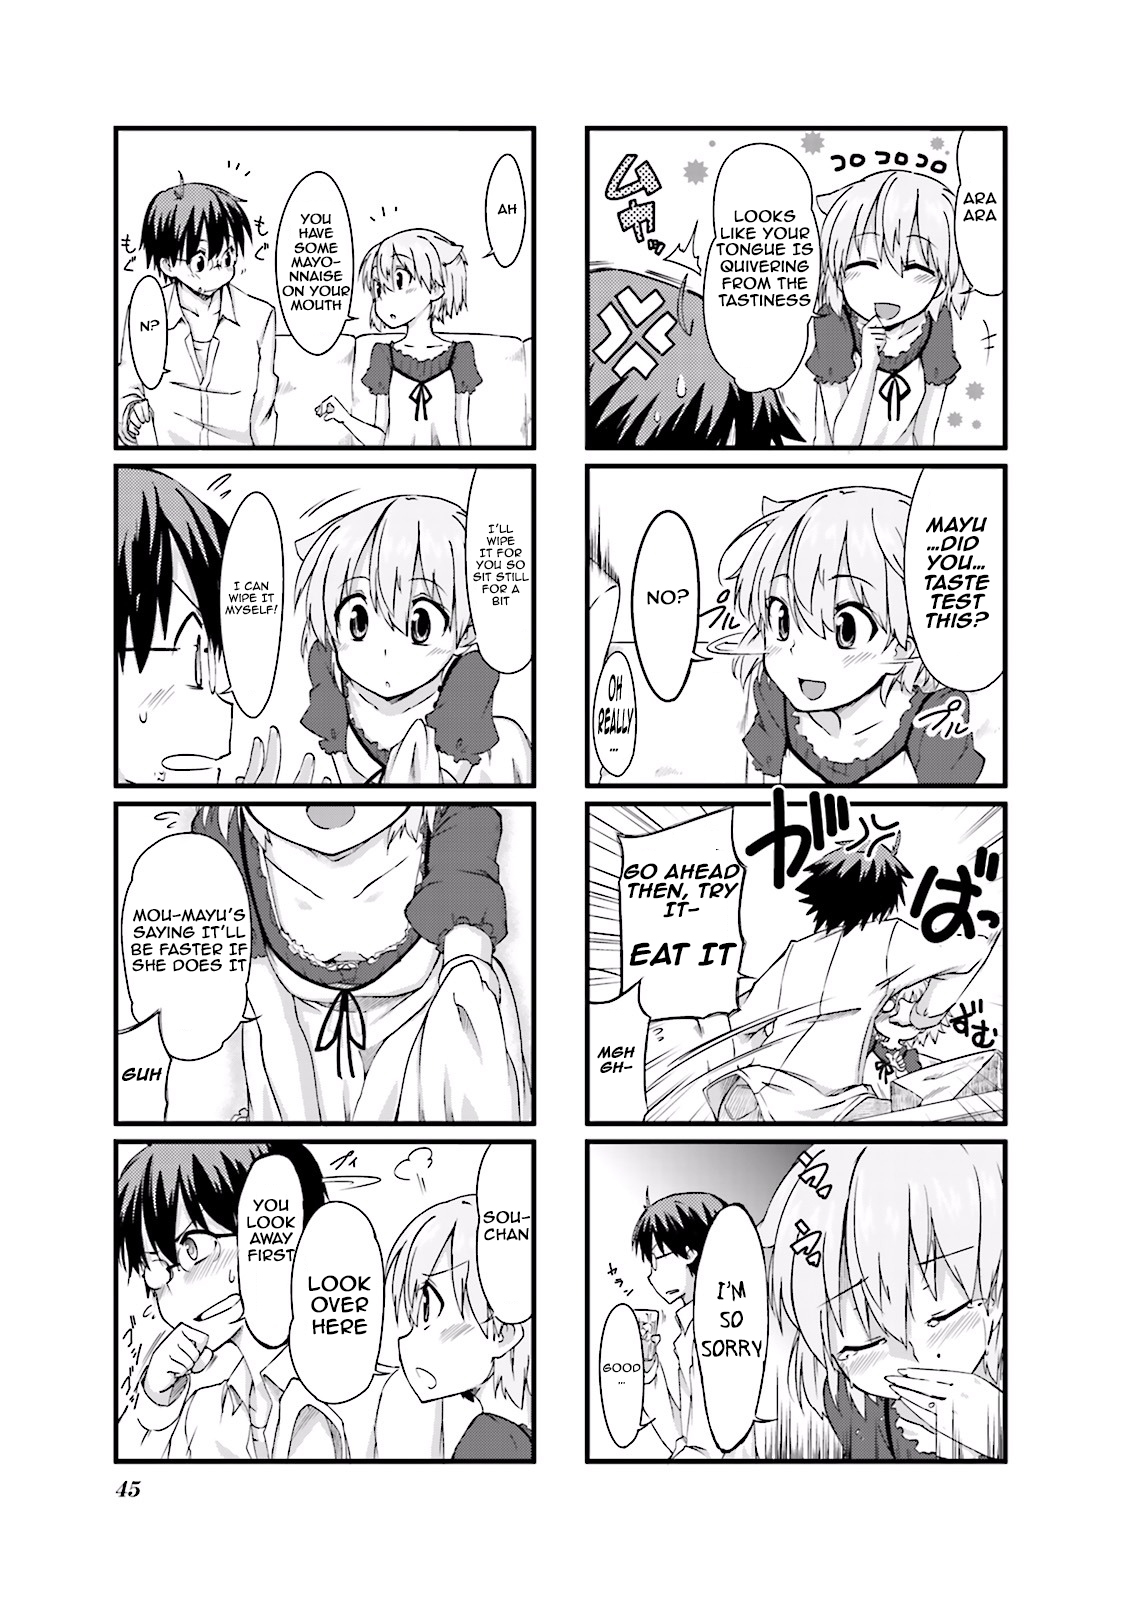 Power of Smile. Vol. 1 Ch. 6